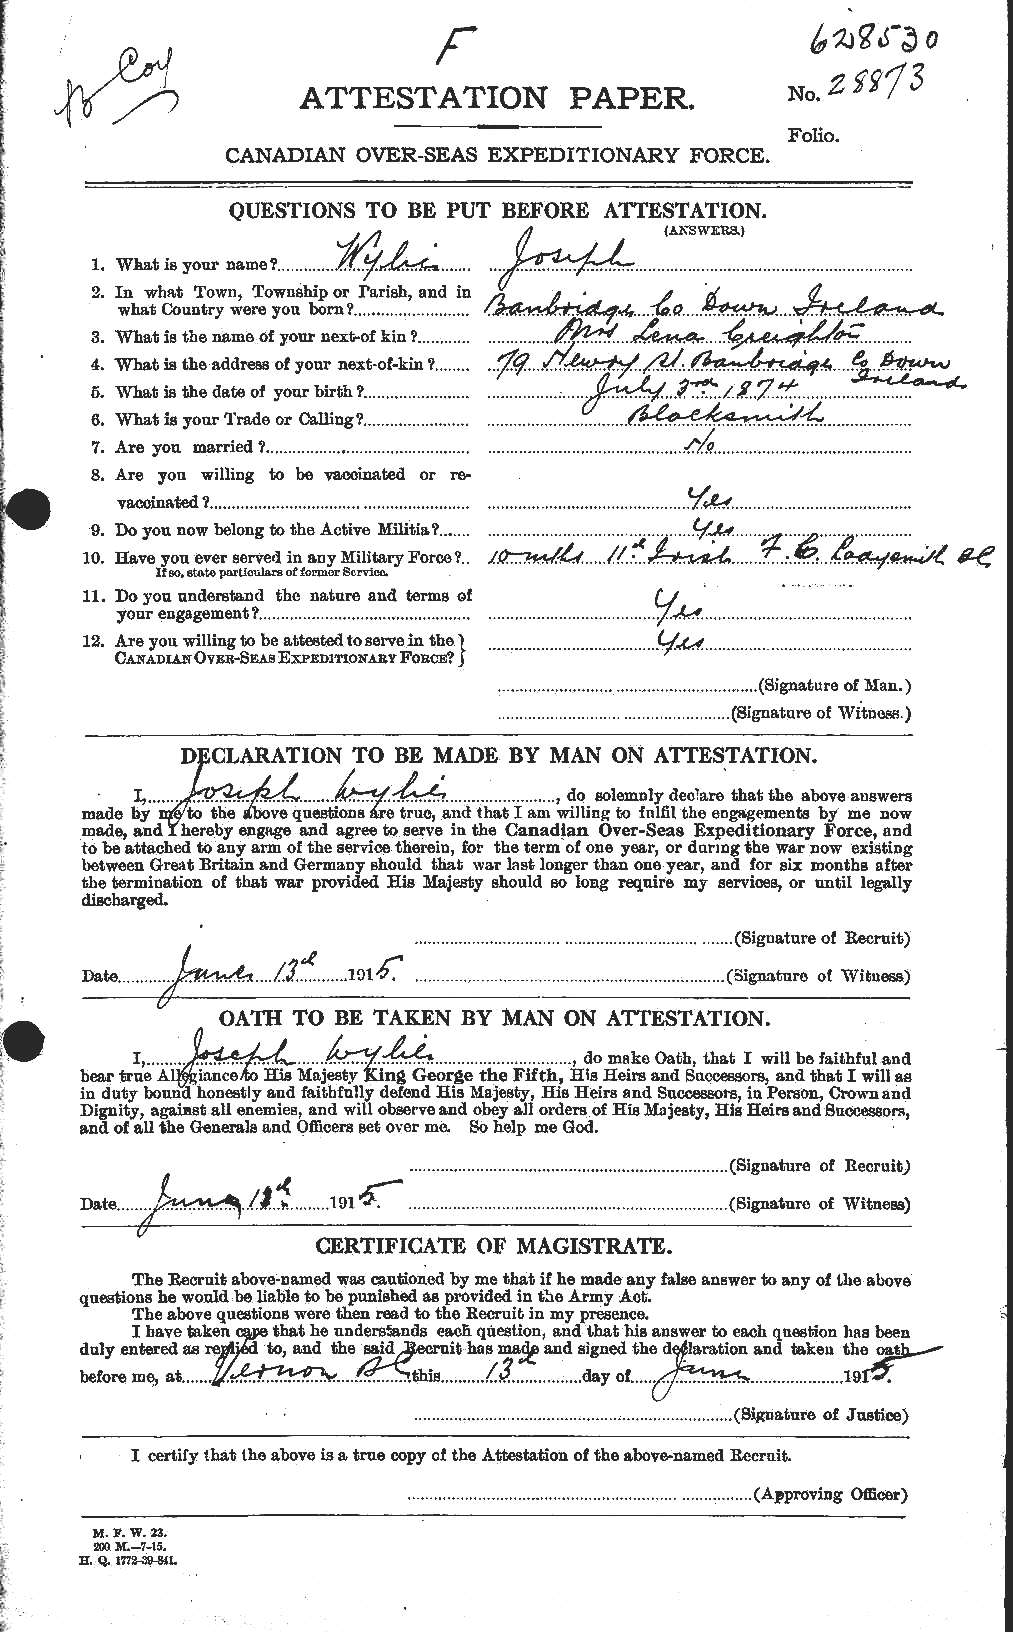 Personnel Records of the First World War - CEF 686744a